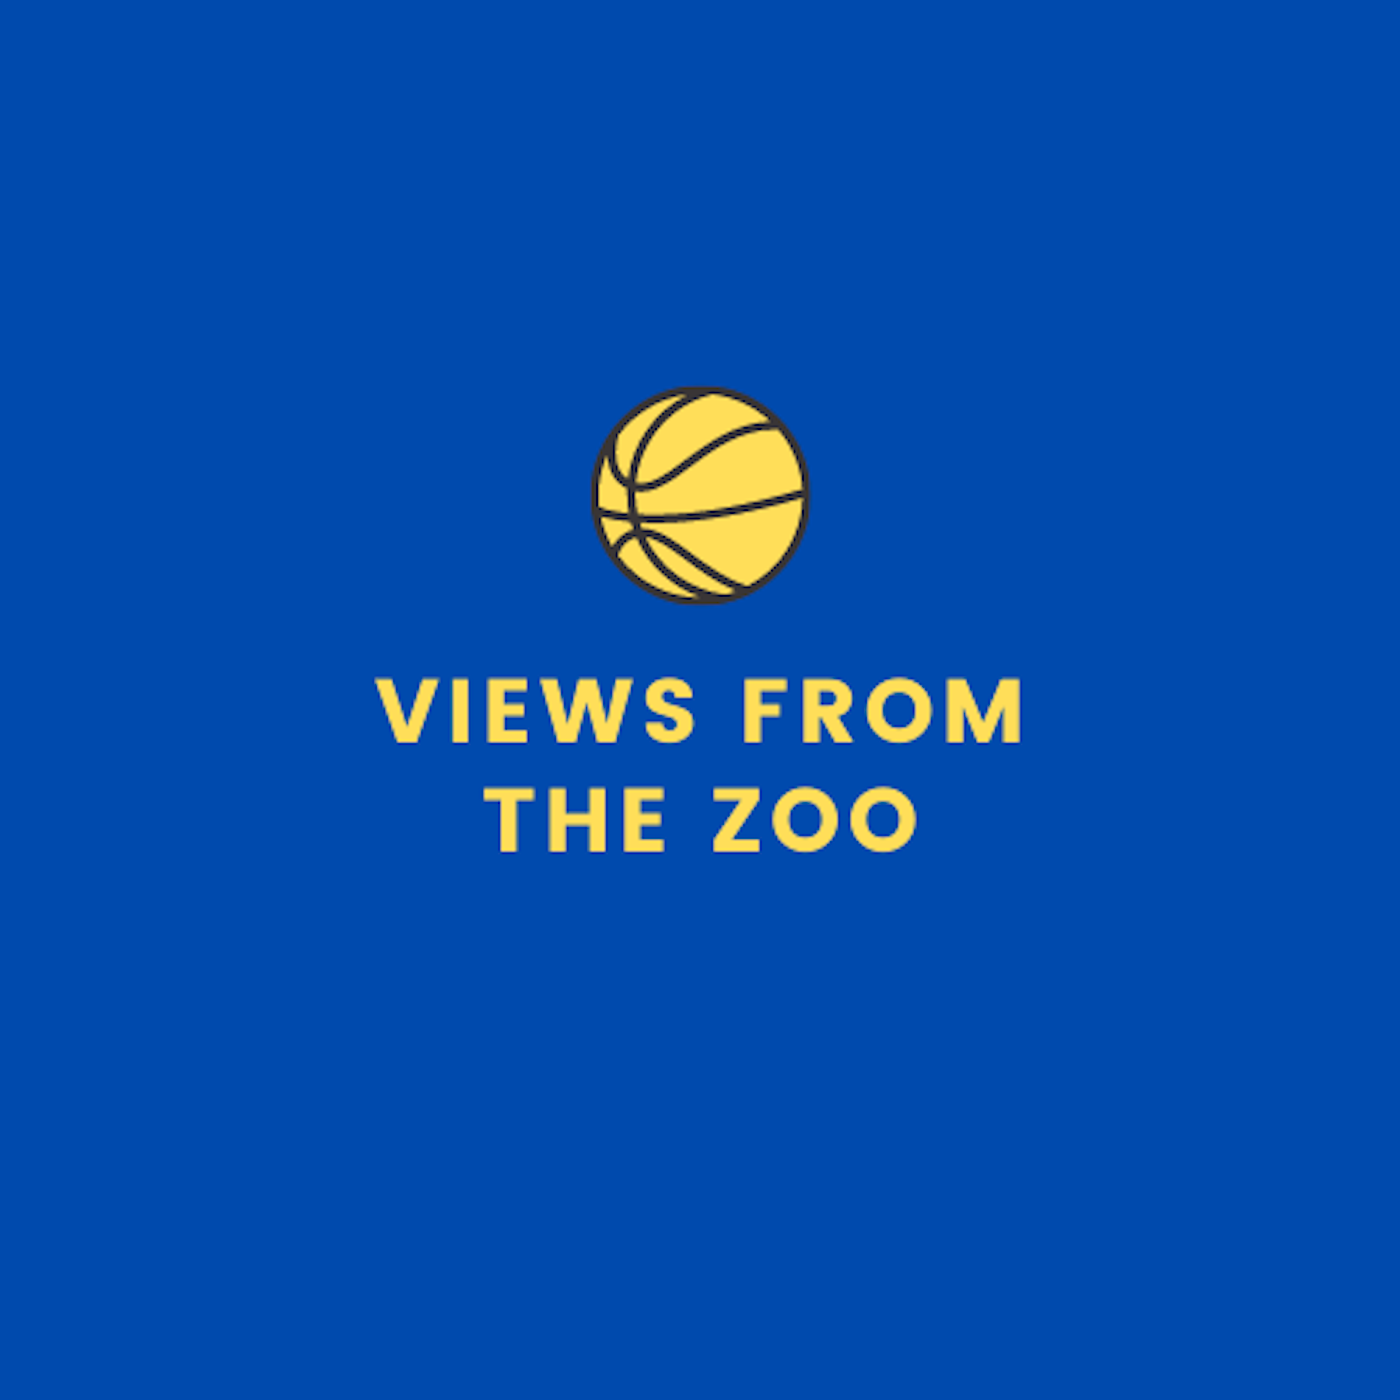 Views from the Zoo Episode 5: Pitt-Syracuse Preview with Stephen Bailey (247 Sports)